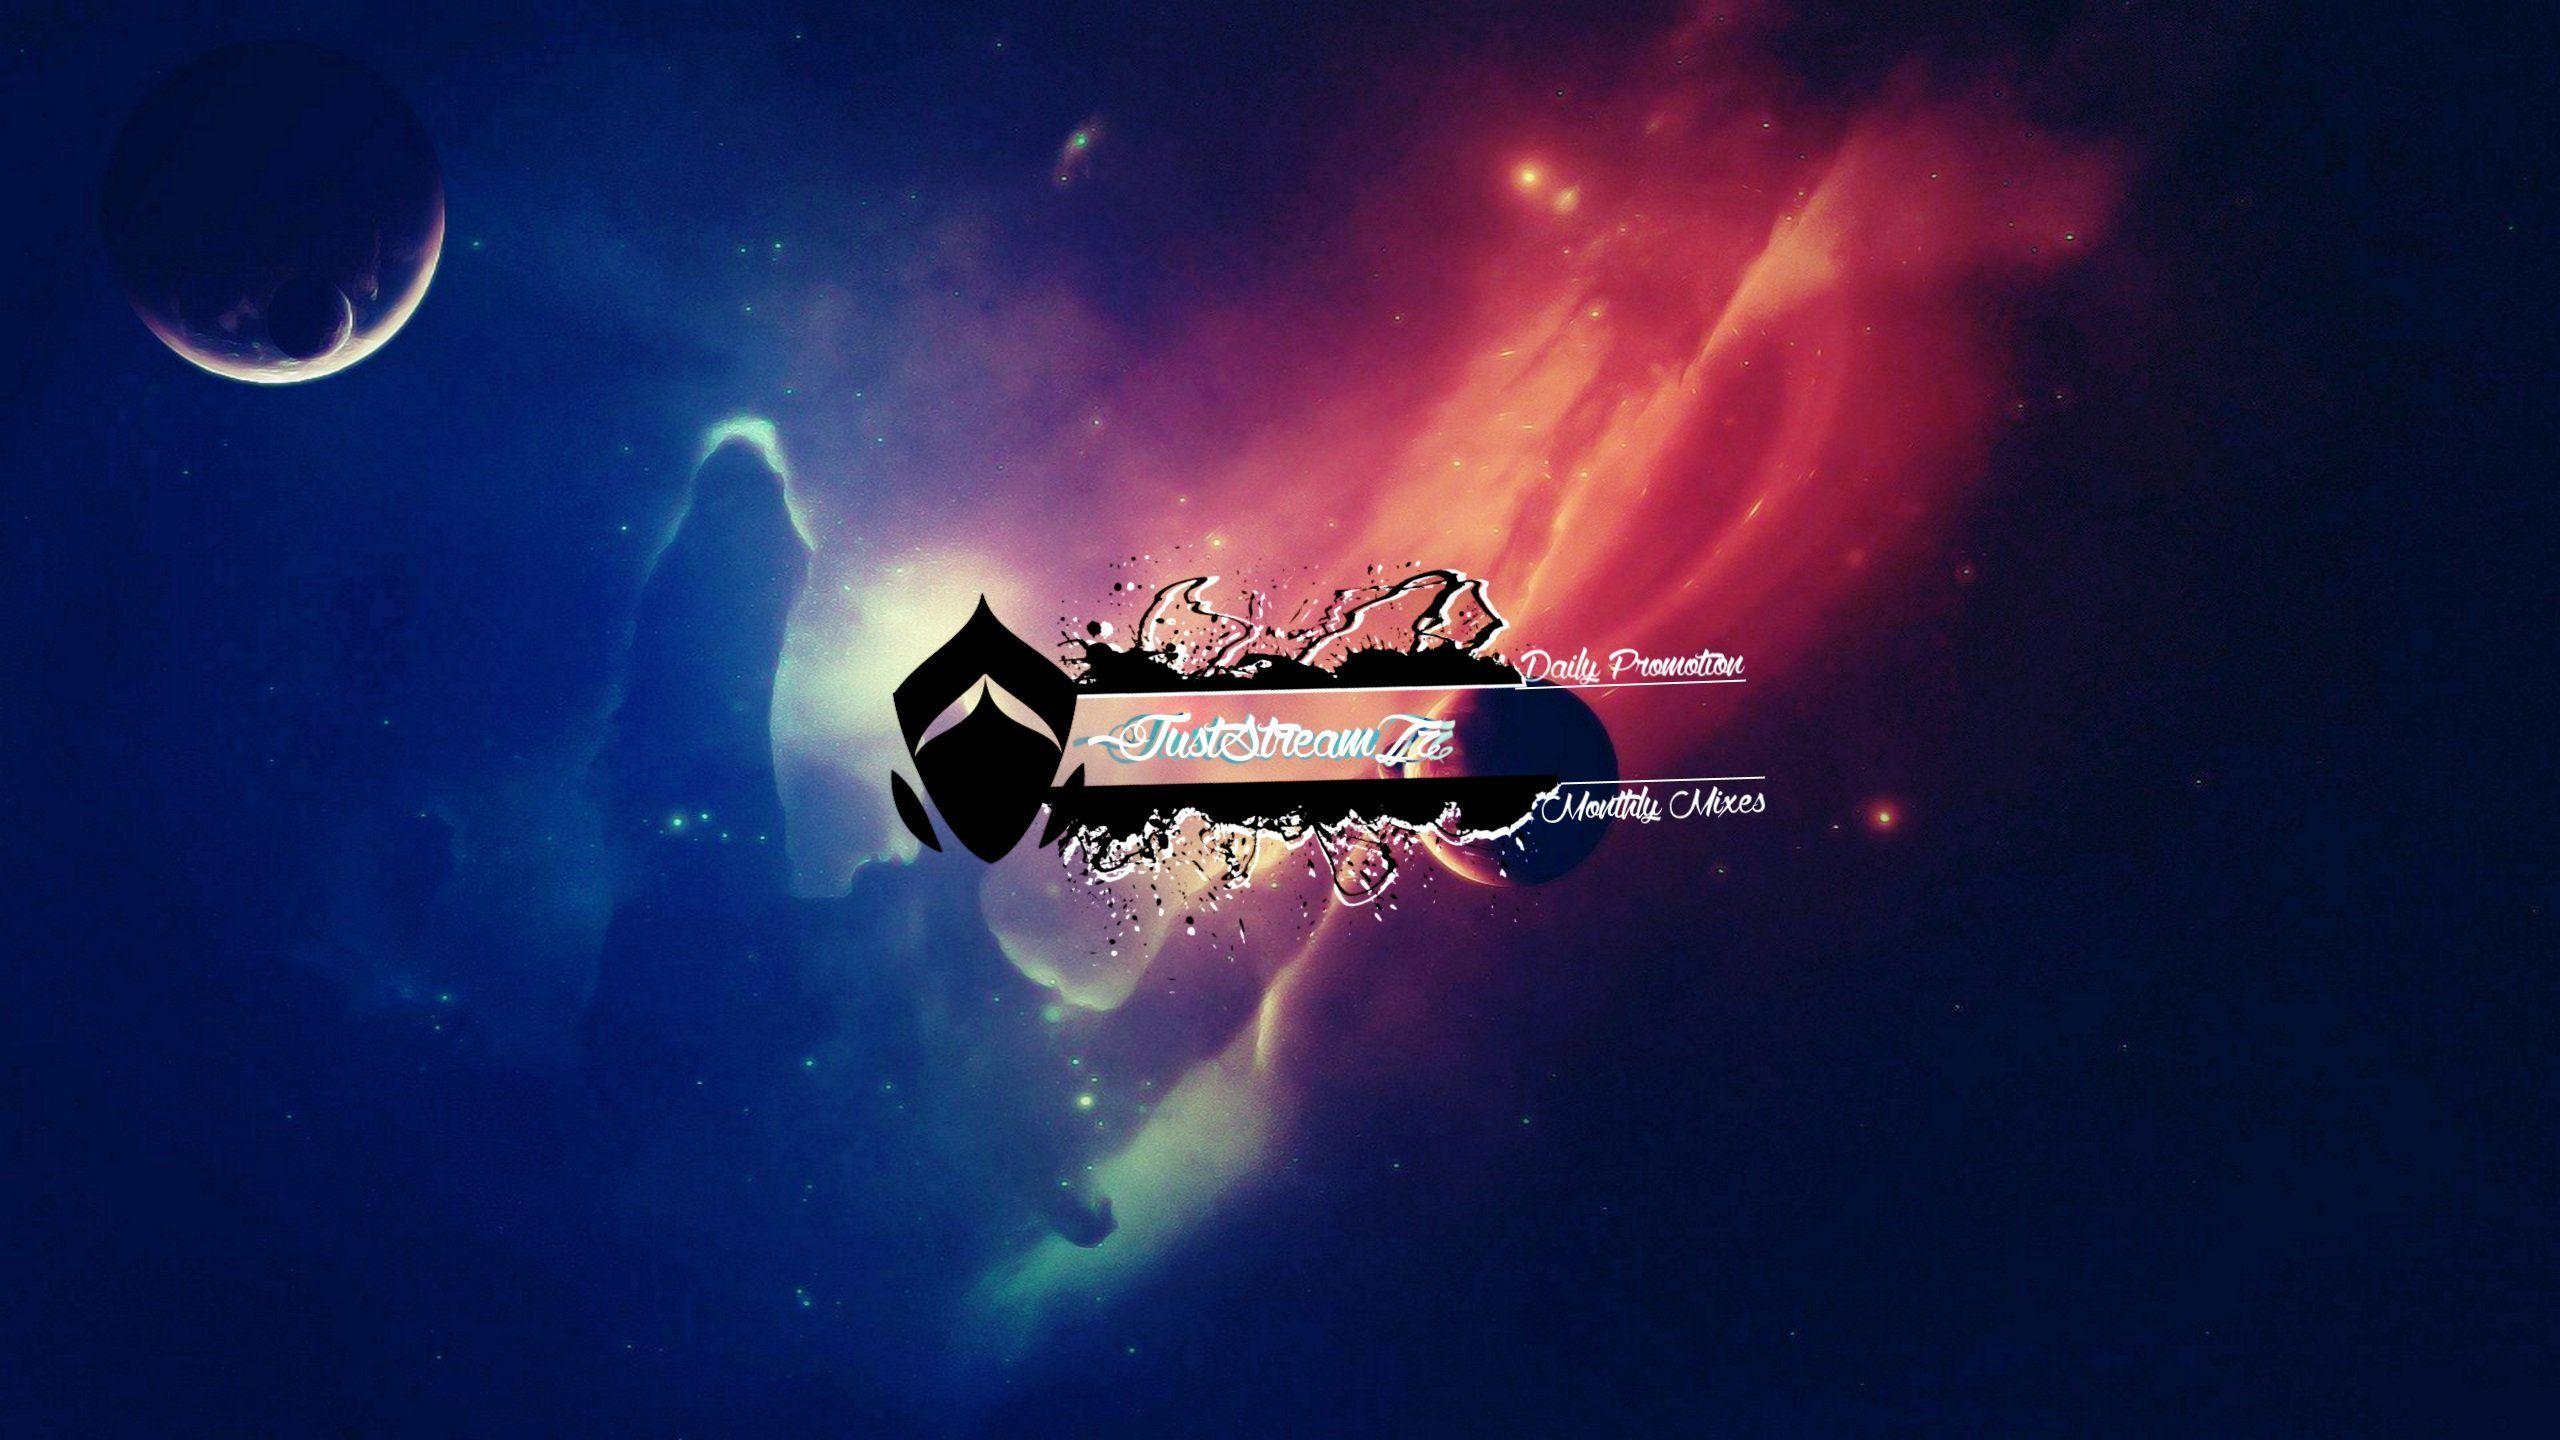 Banner youtube great apollo space universe juststreamzz artwork